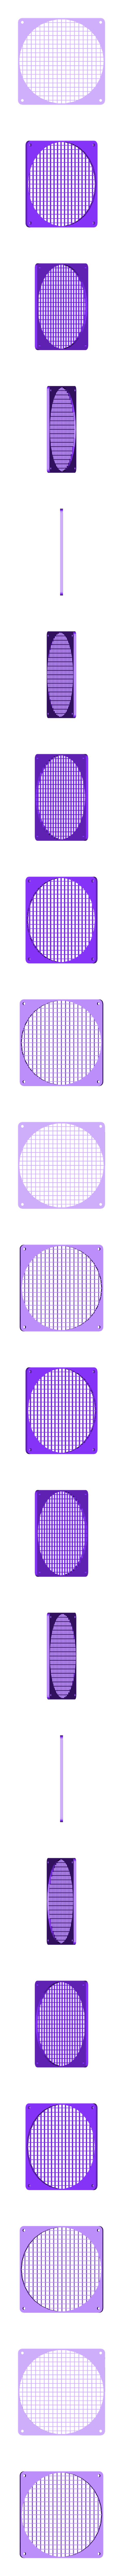 140mm_grid_full_fan_cover.stl Download free STL file Customizable Fan Grill Cover • 3D print design, MightyNozzle